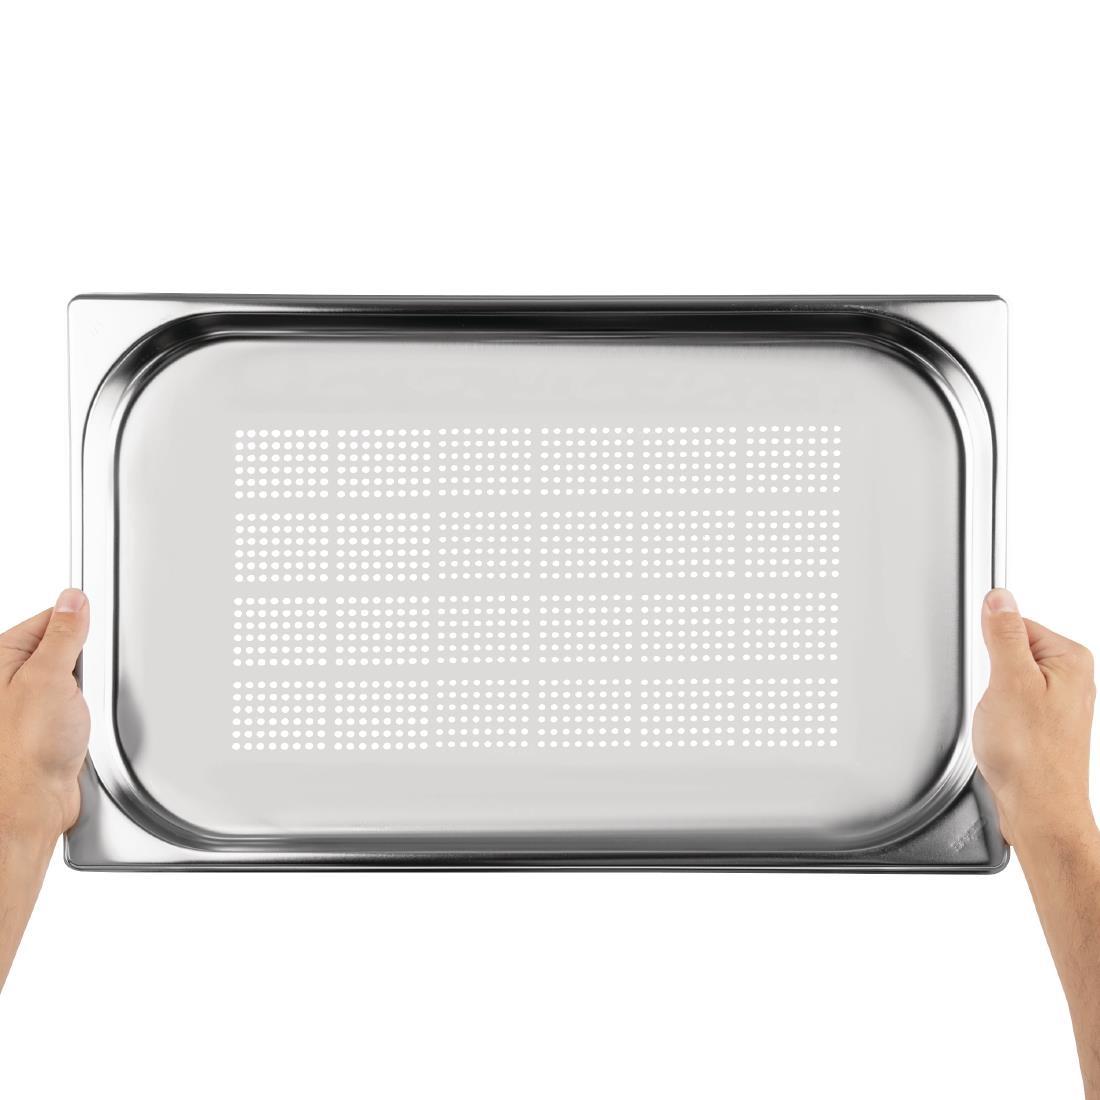 Vogue Stainless Steel Perforated 1/1 Gastronorm Pan 20mm - K827  - 4